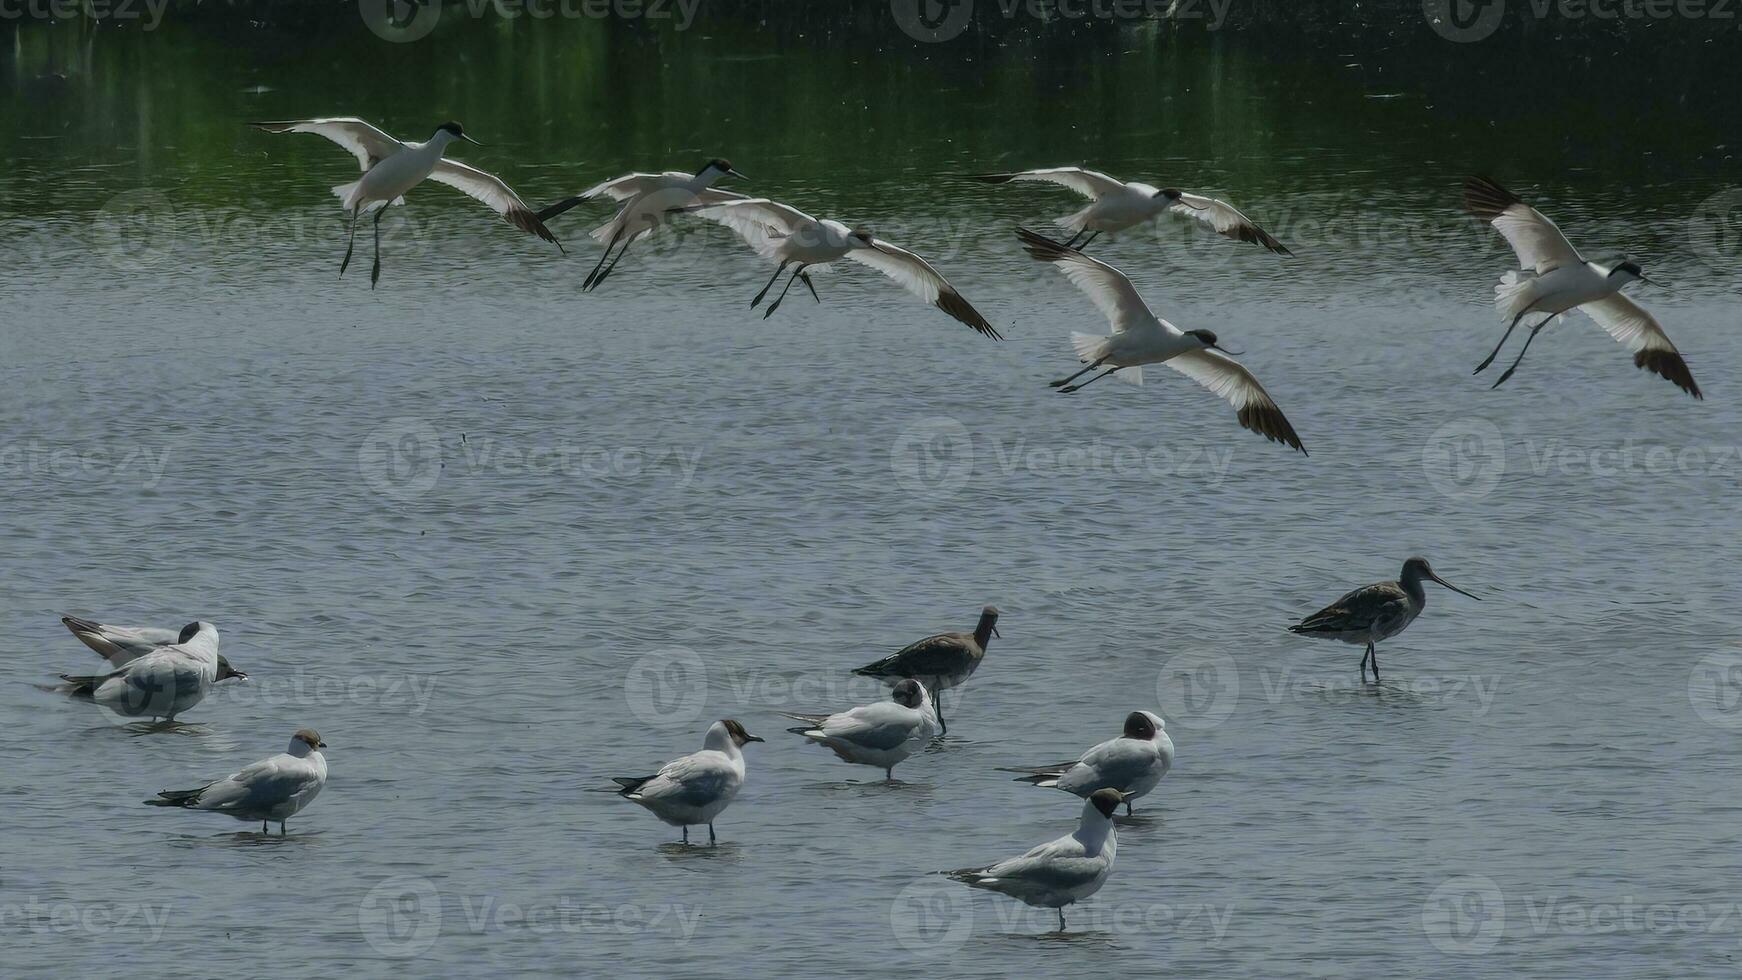 Avocets coming in to land on a shallow lake photo